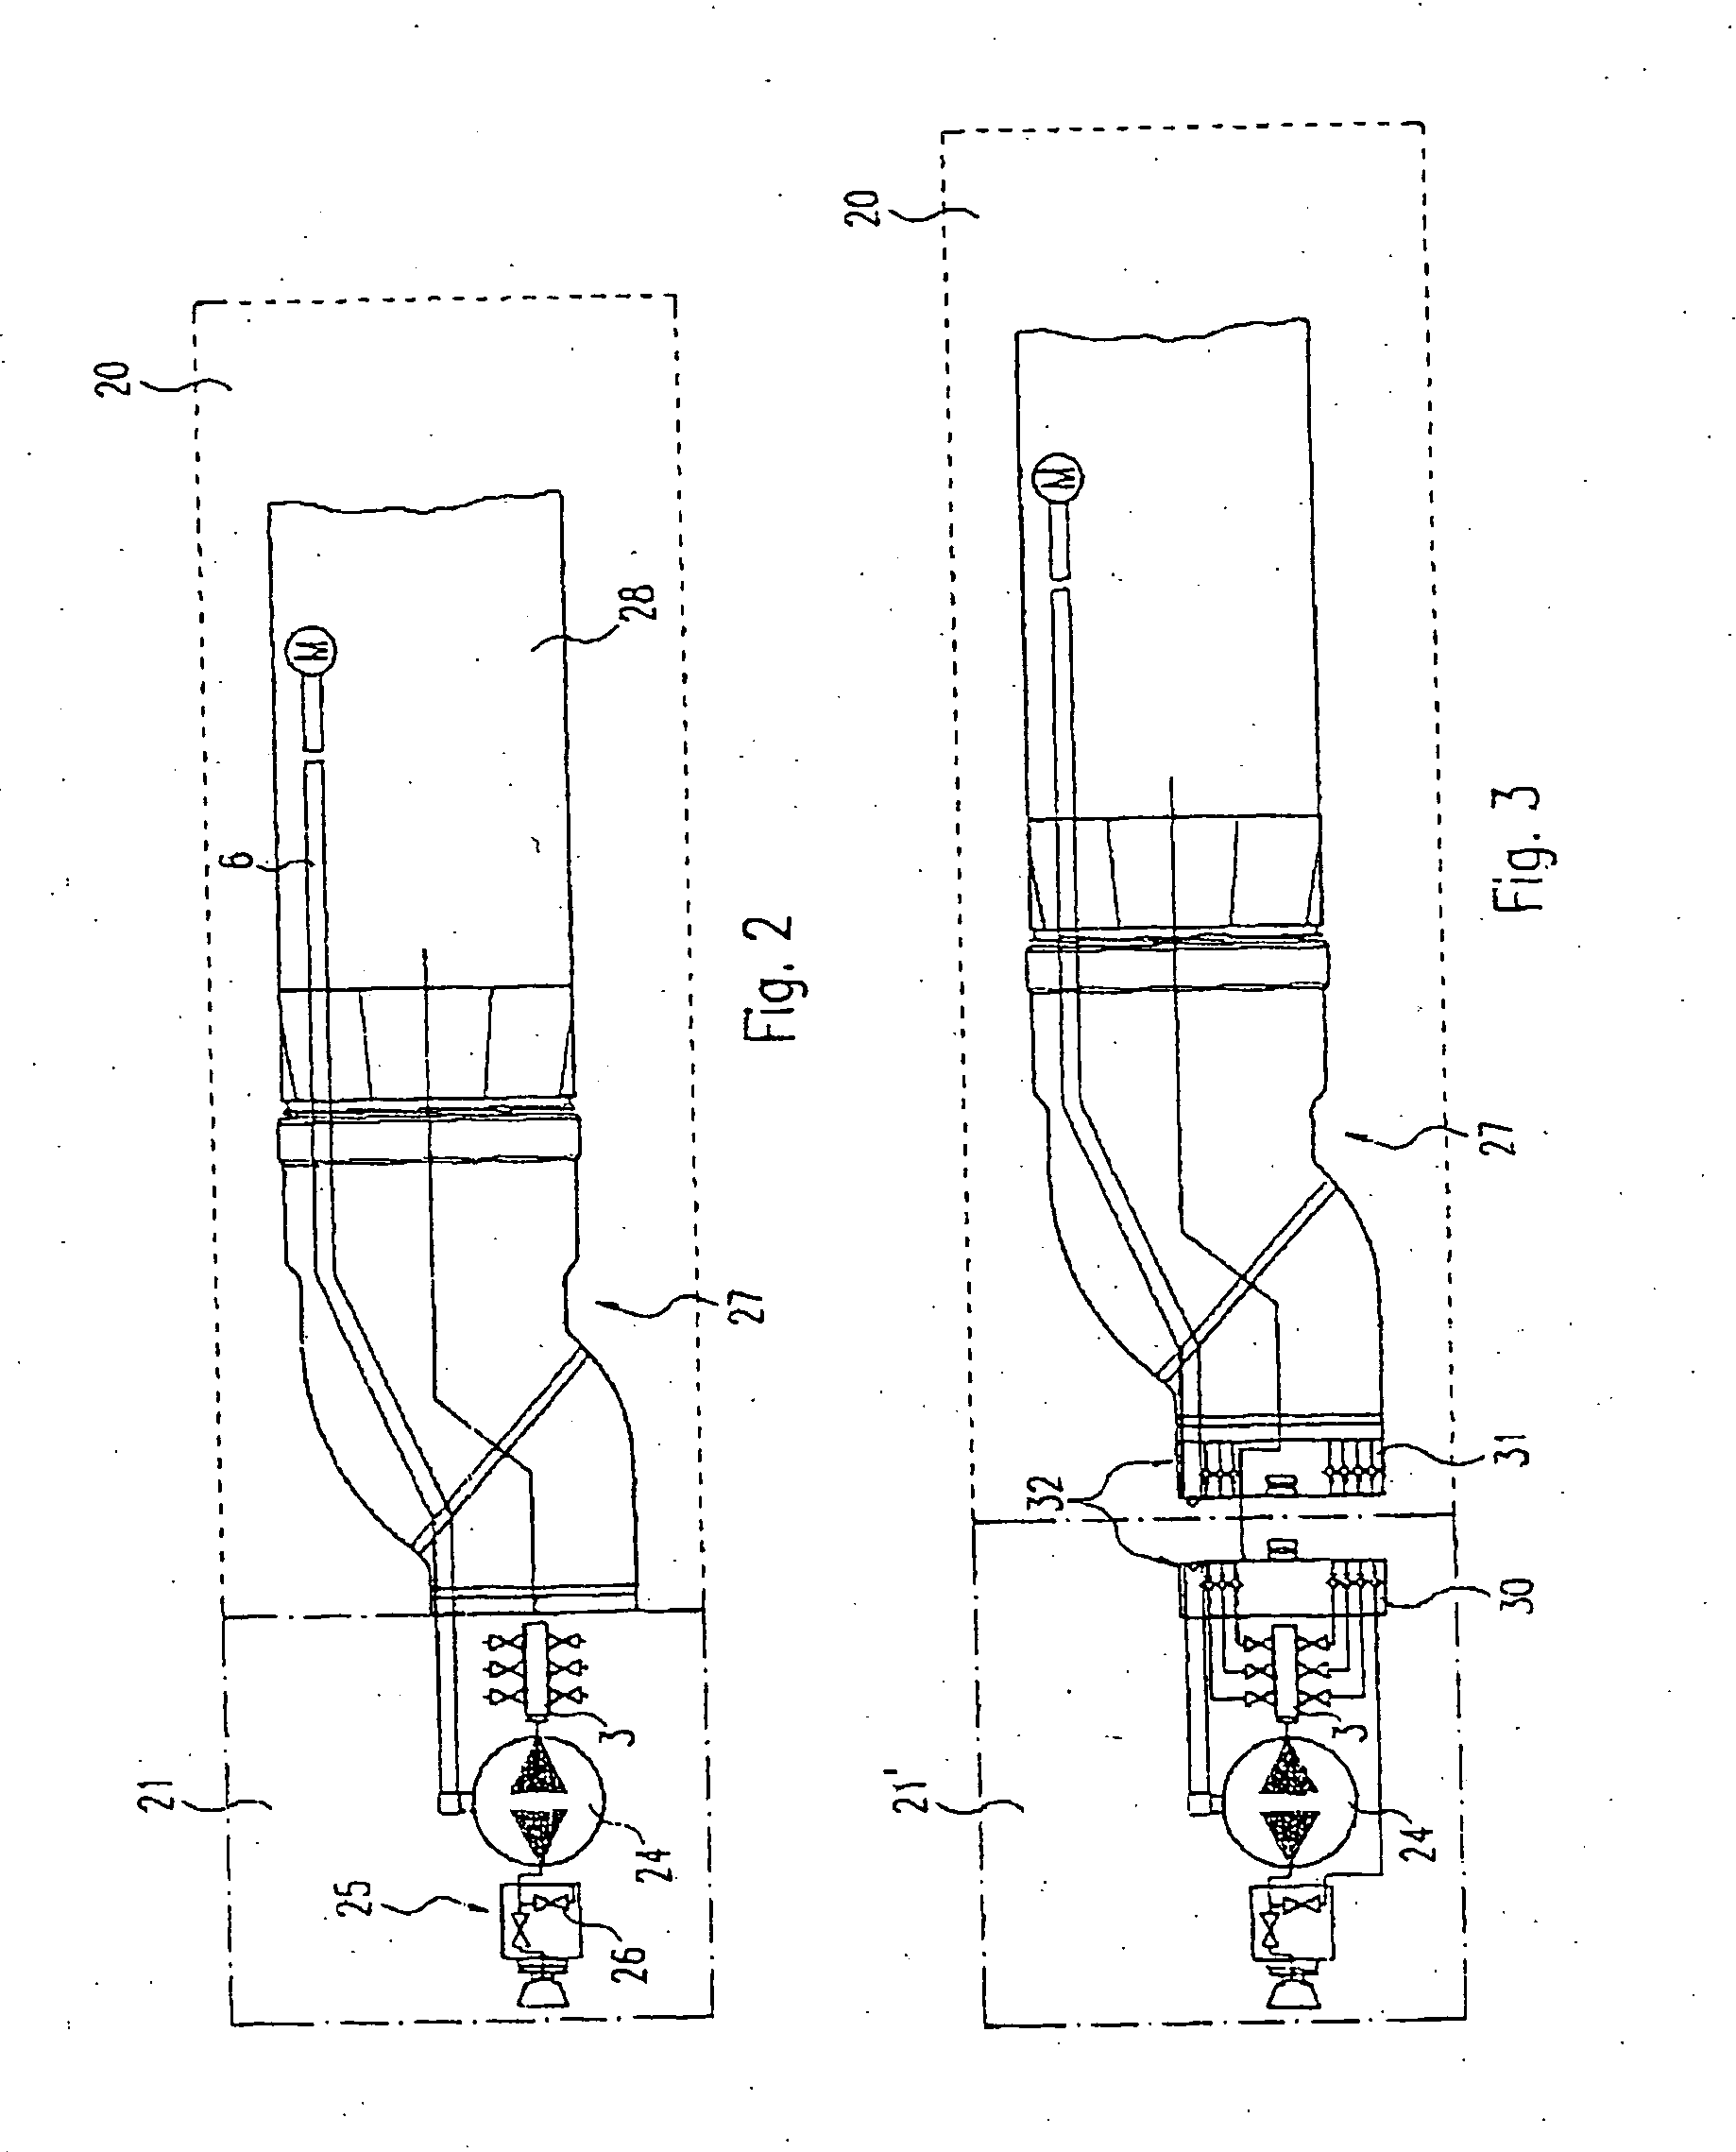 Spraying device for serial spraying of work pieces